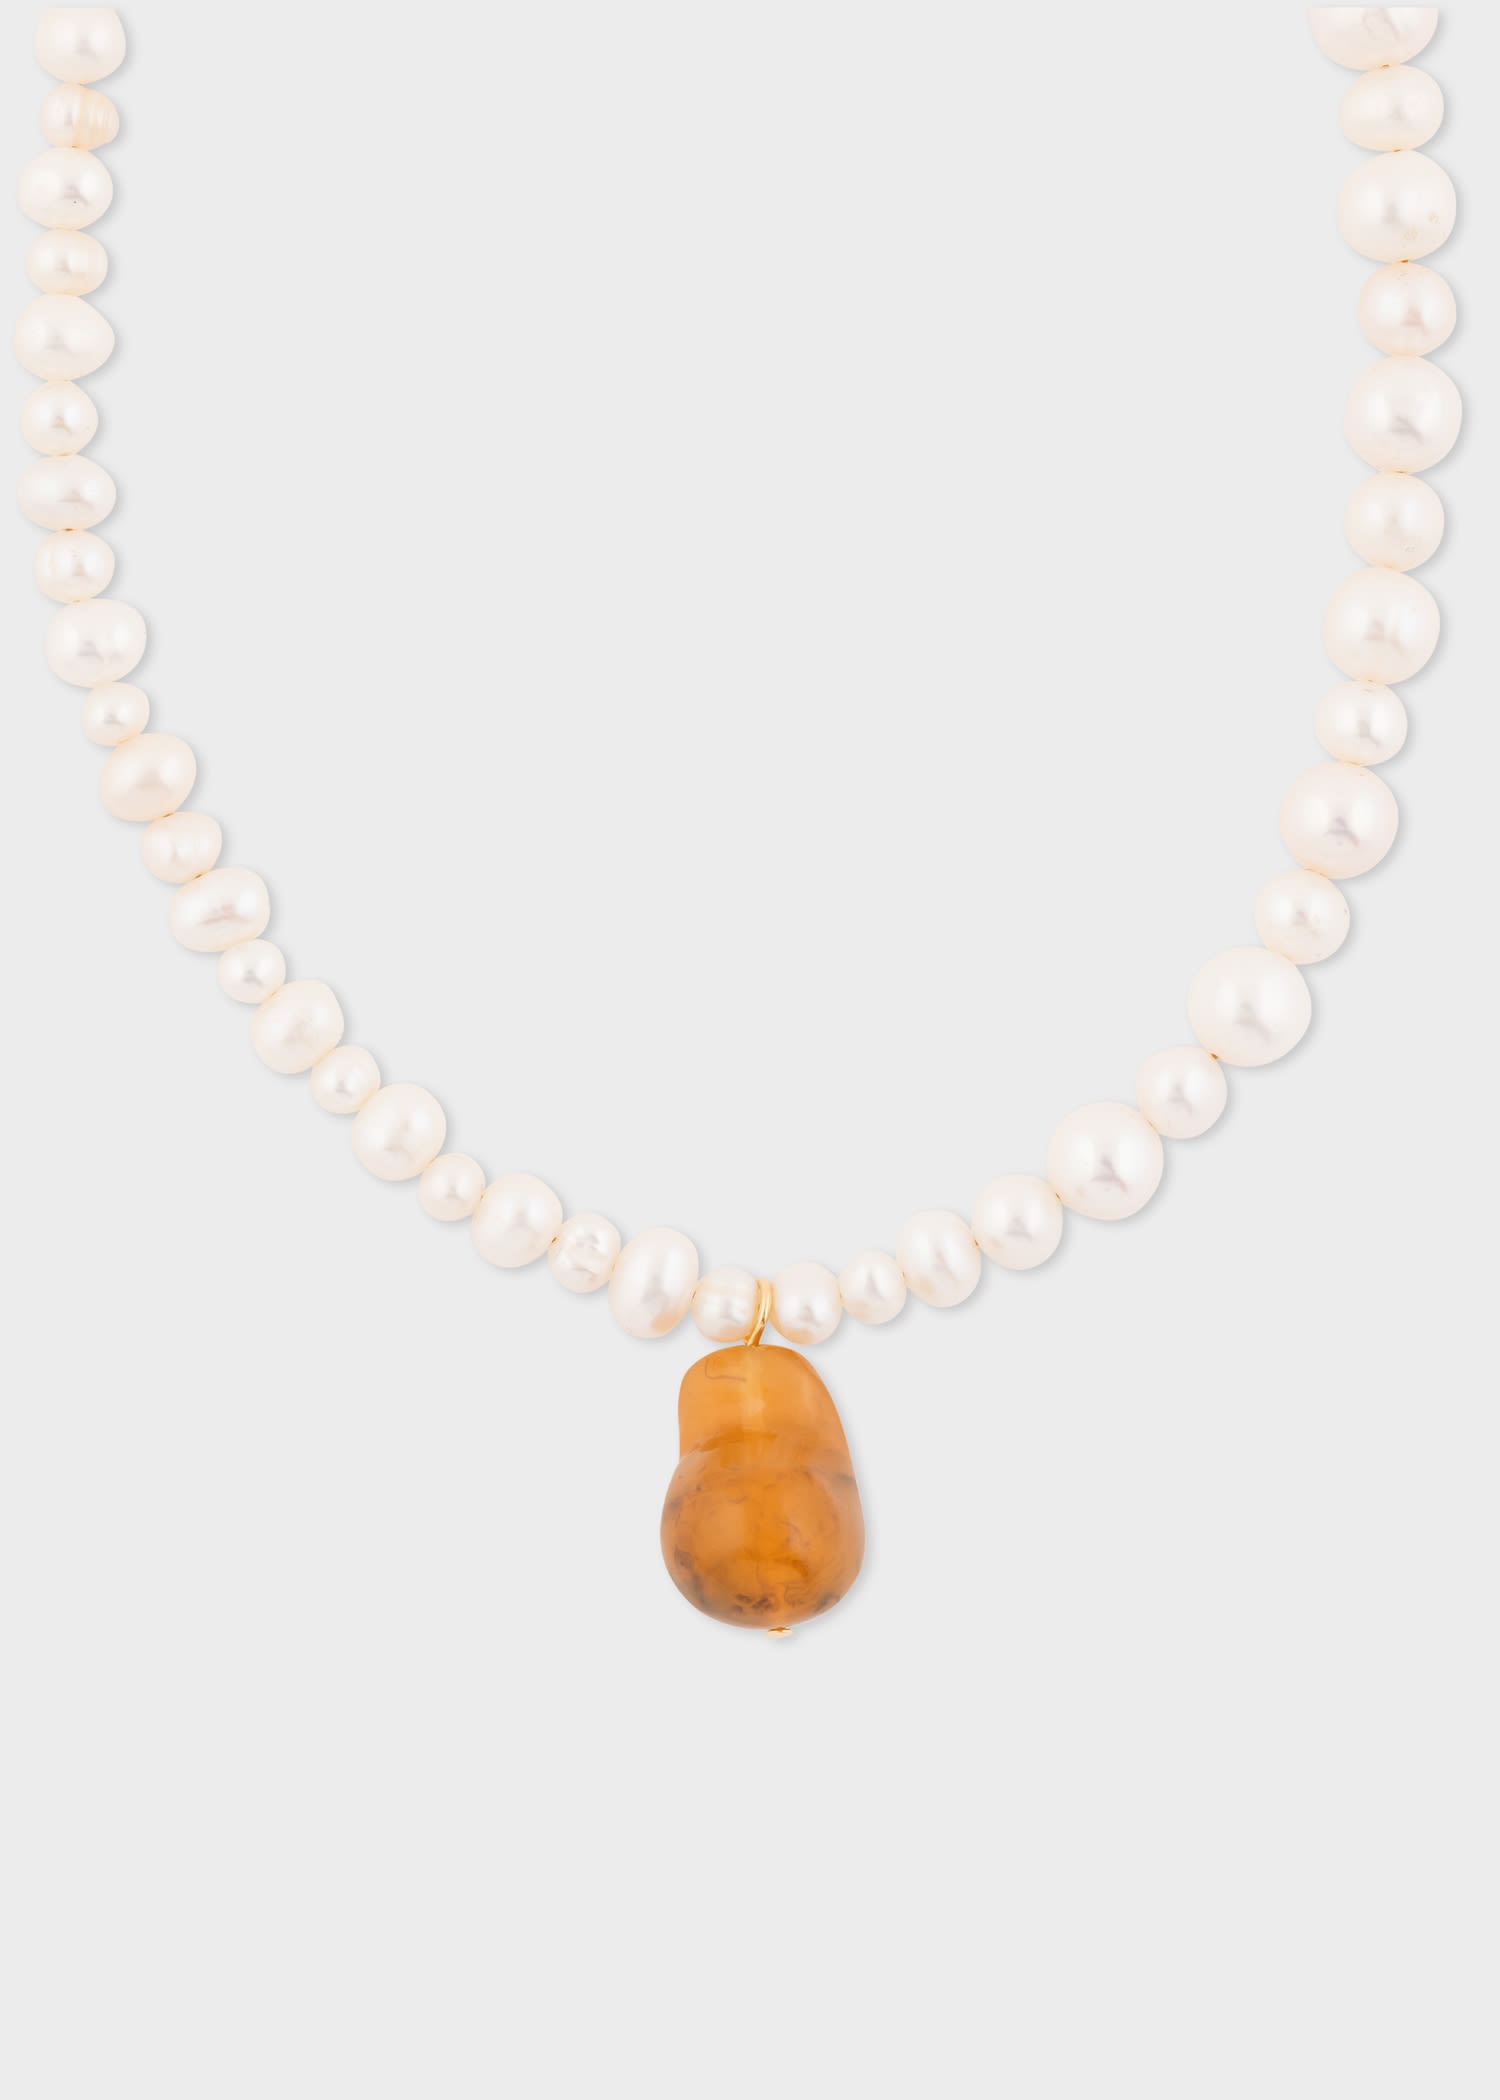 Pearl & Bio Resin Necklace by Completedworks - 1